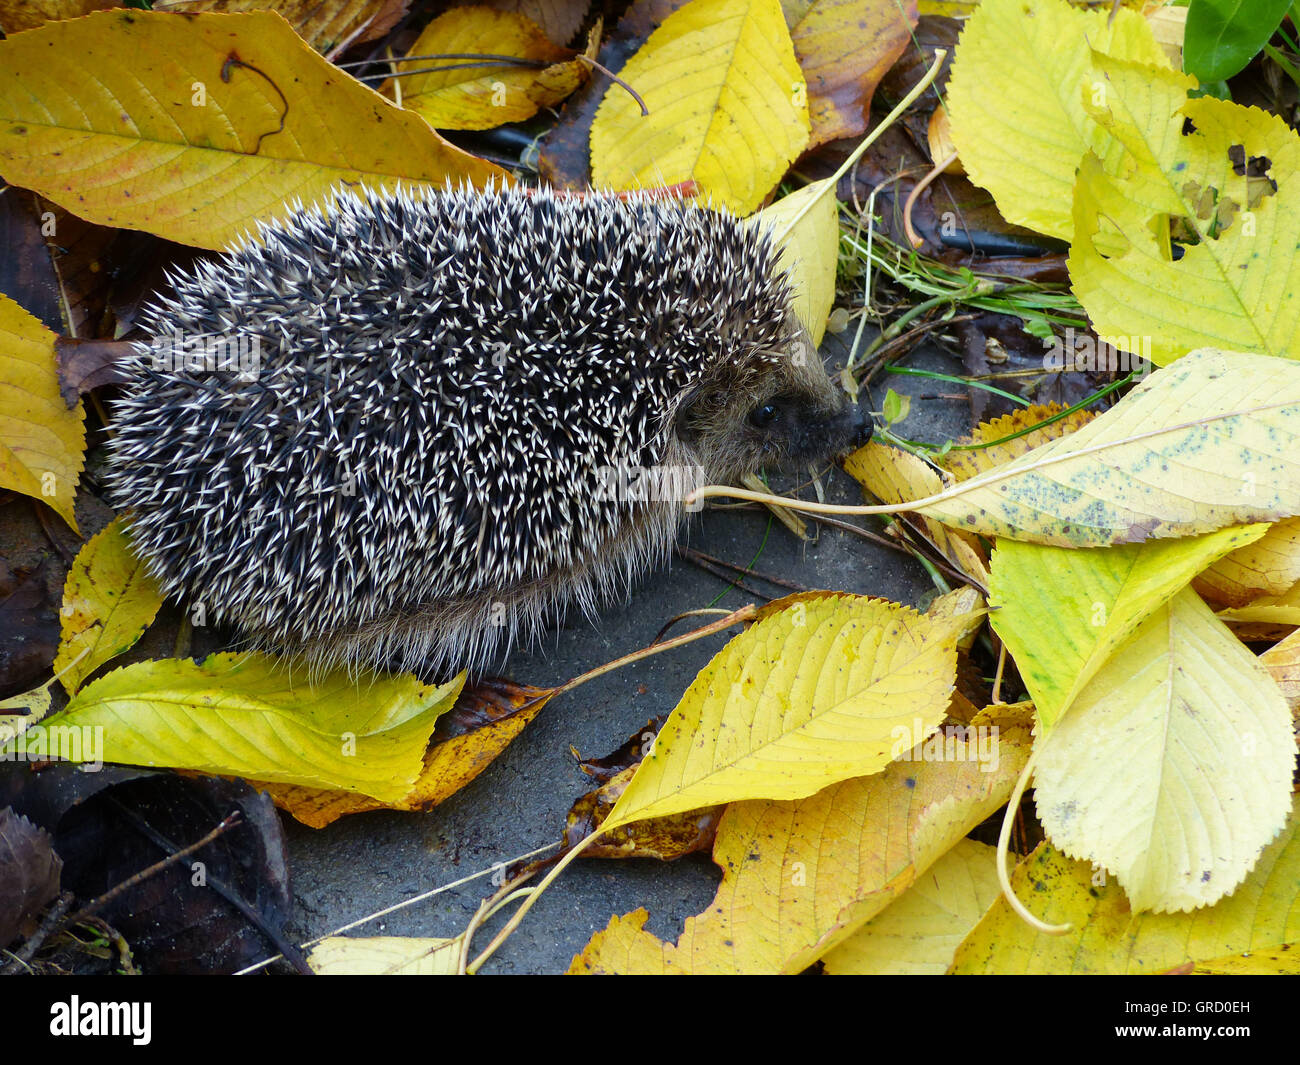 Hedgehog In Autumn Leaves Stock Photo